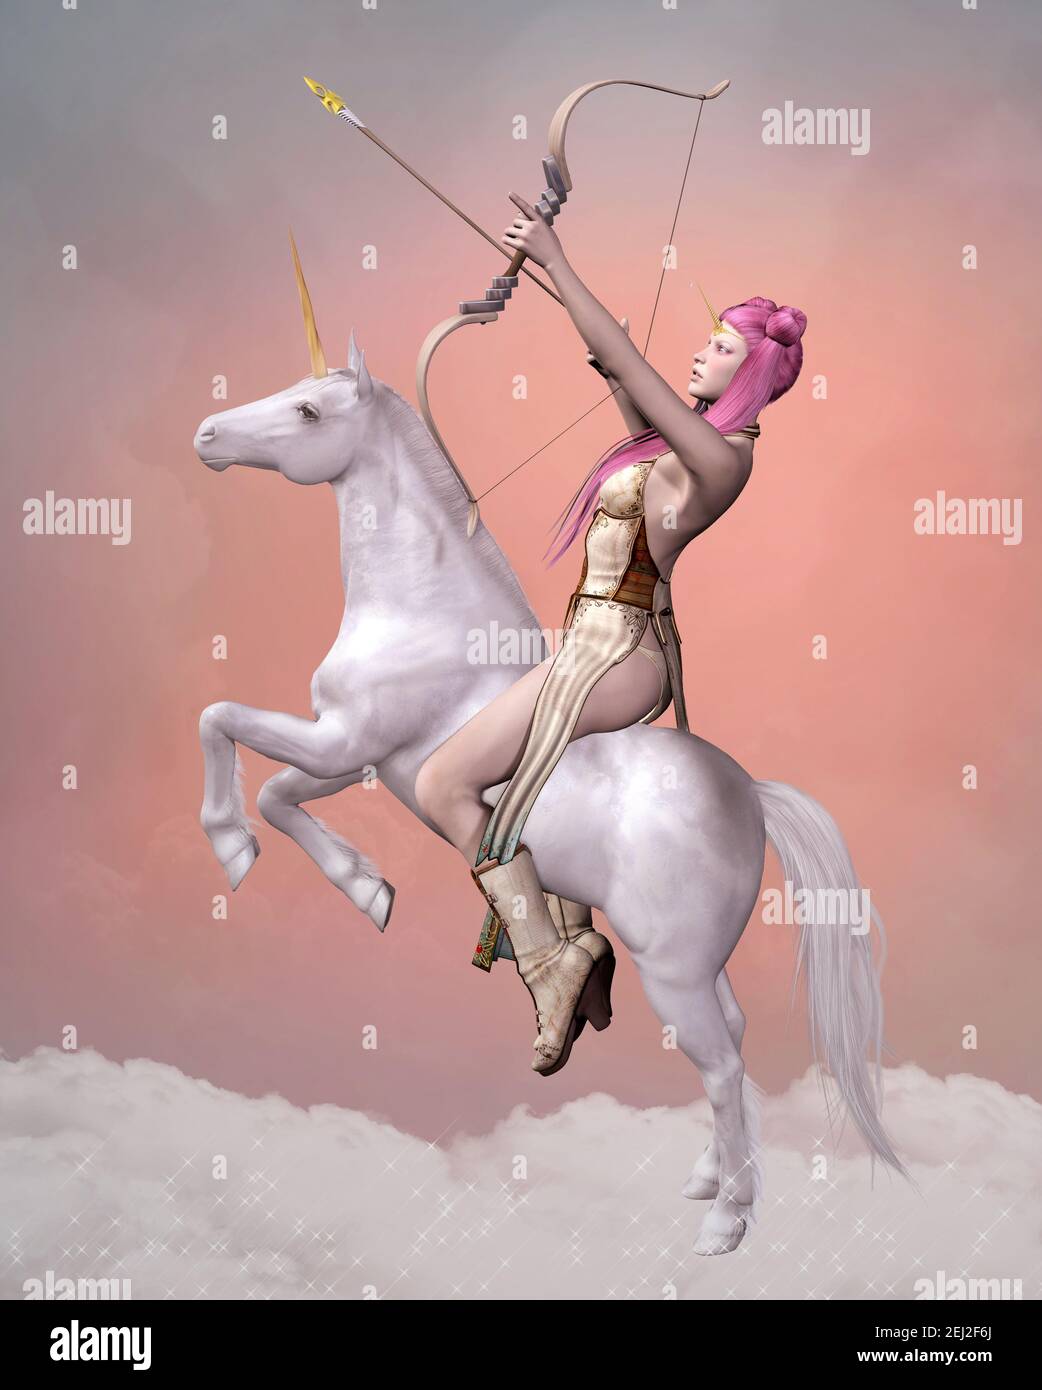 Knight with a bow riding a white unicorn on a pink background Stock Photo